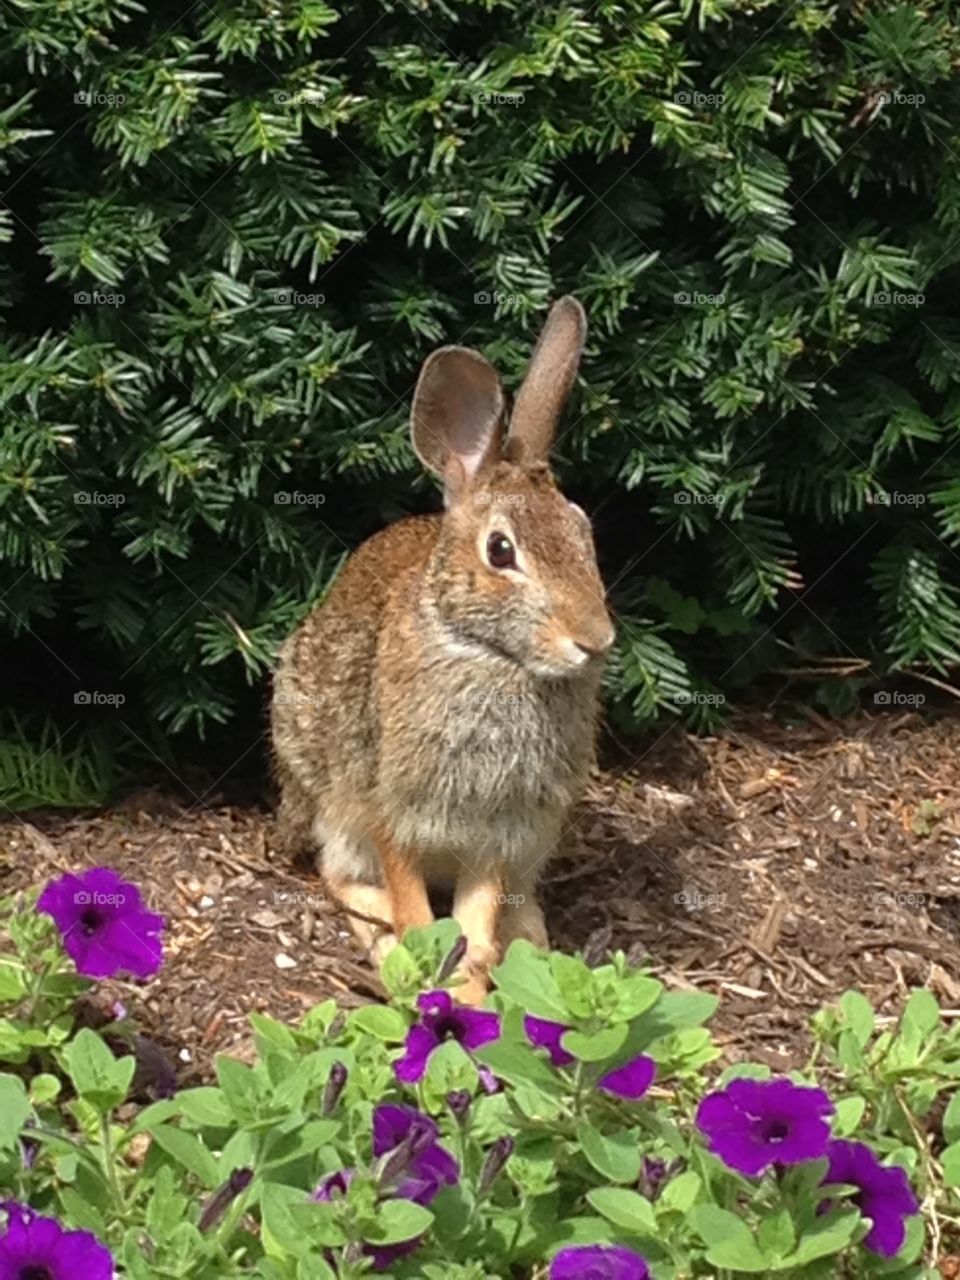 Rabbit in the bushes!